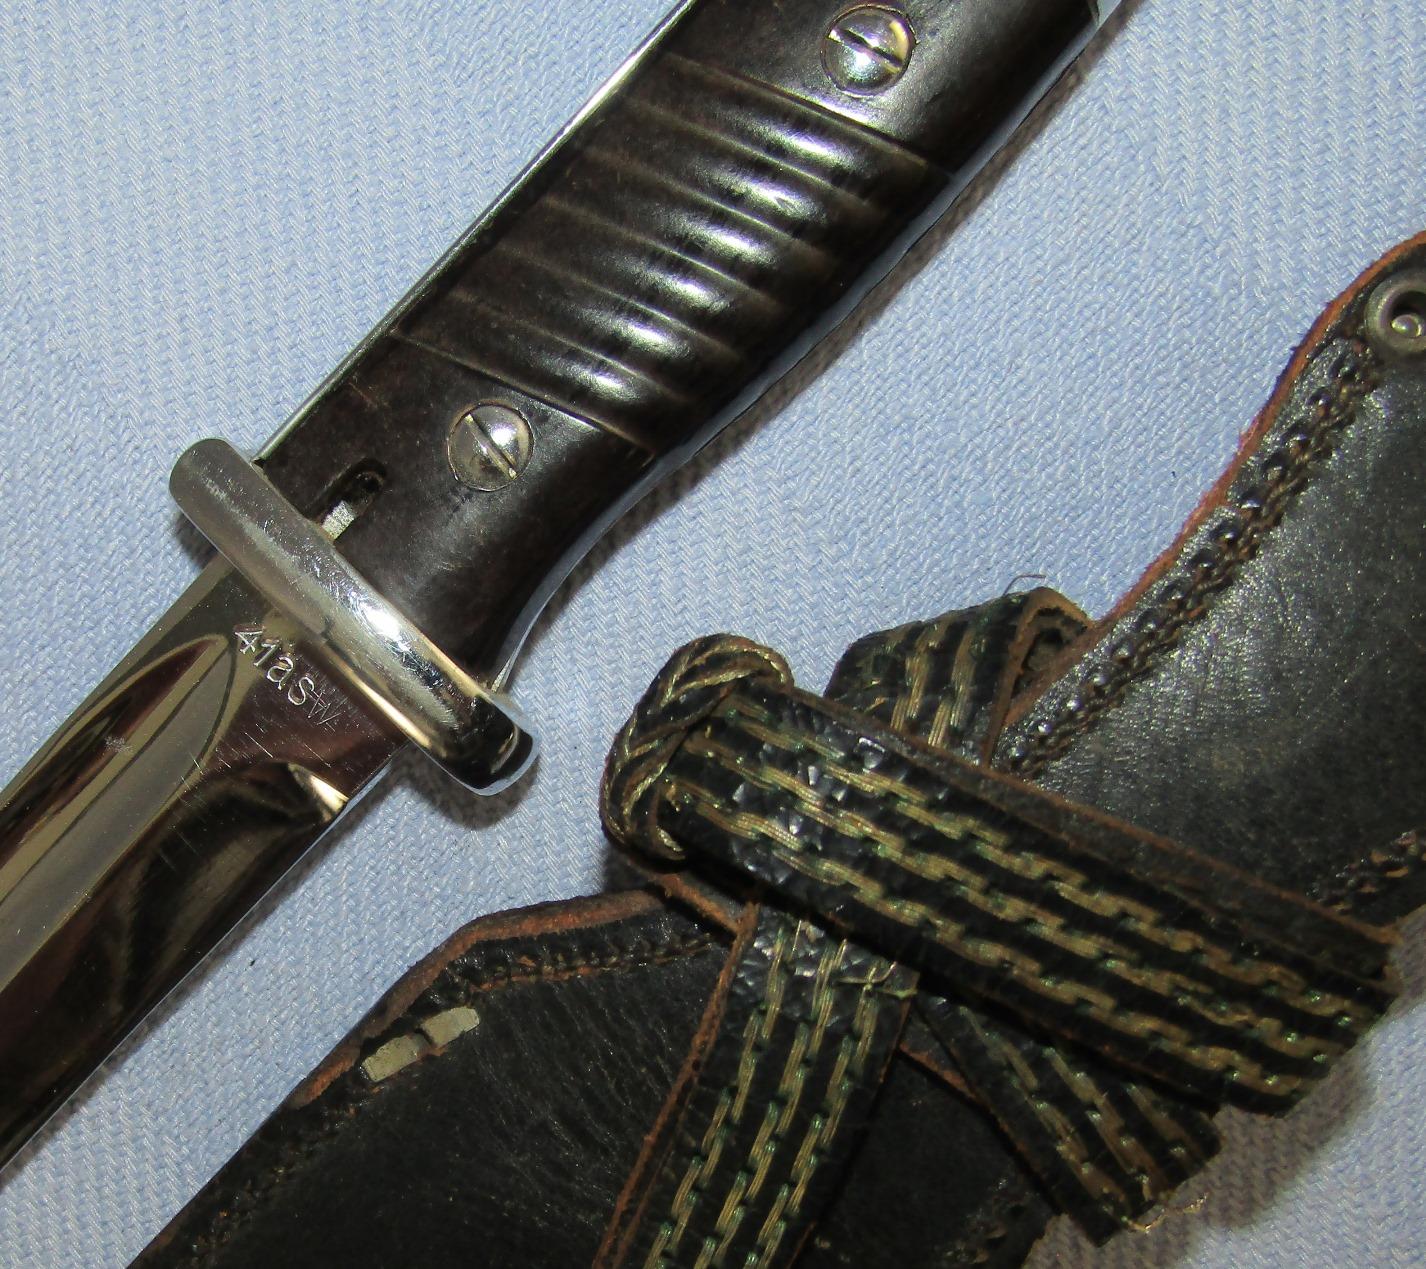 K98 Field Bayonet With Chromed Fittings/Blade/Scabbard For Parade? Portapee/Frog